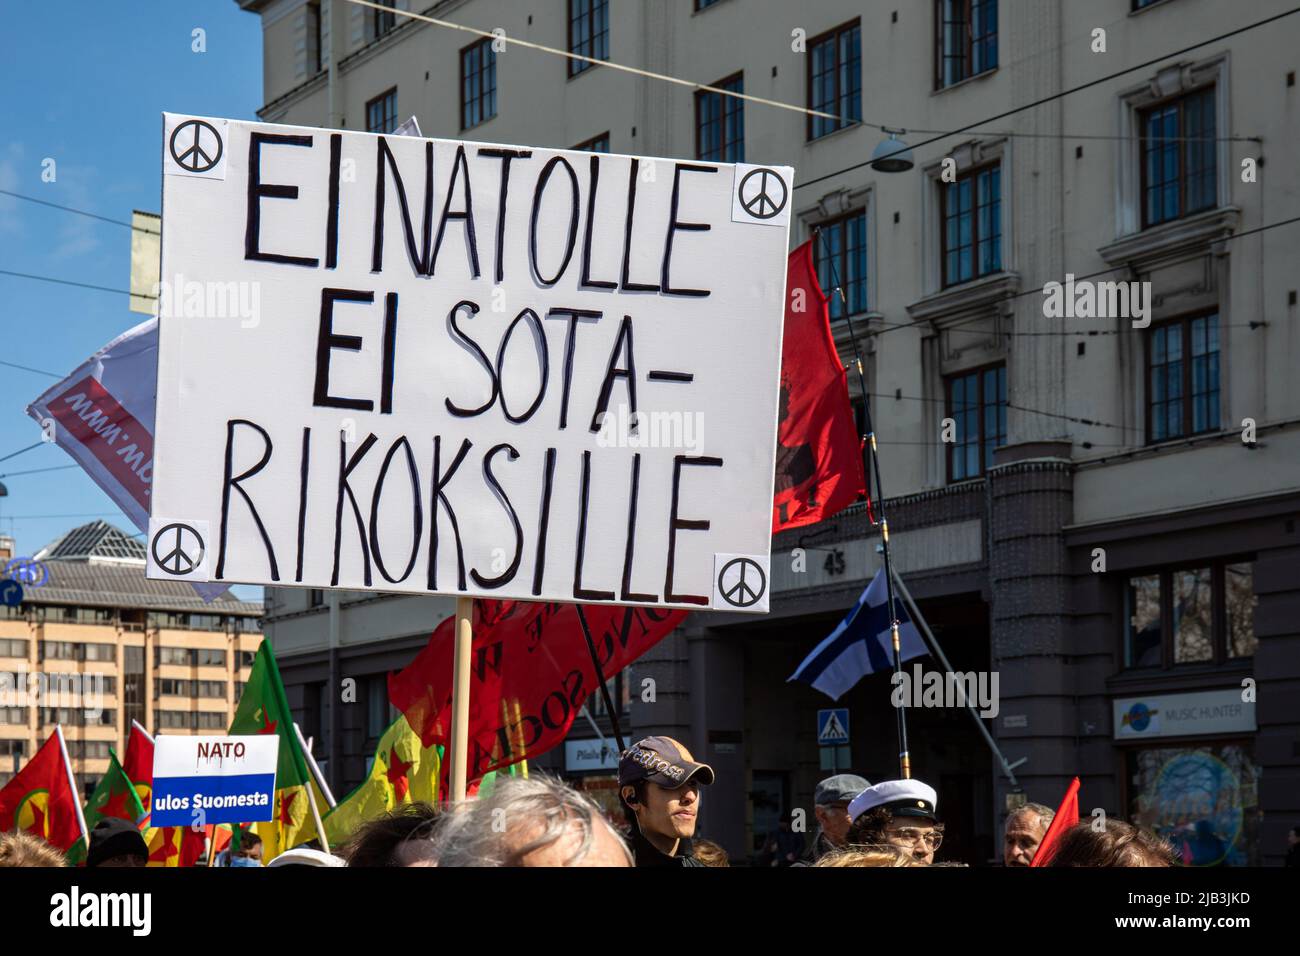 EI NATOLLE. Hand-written anti-NATO sign at socialist May Day parade on International Workers' Day in Helsinki, Finland. Stock Photo